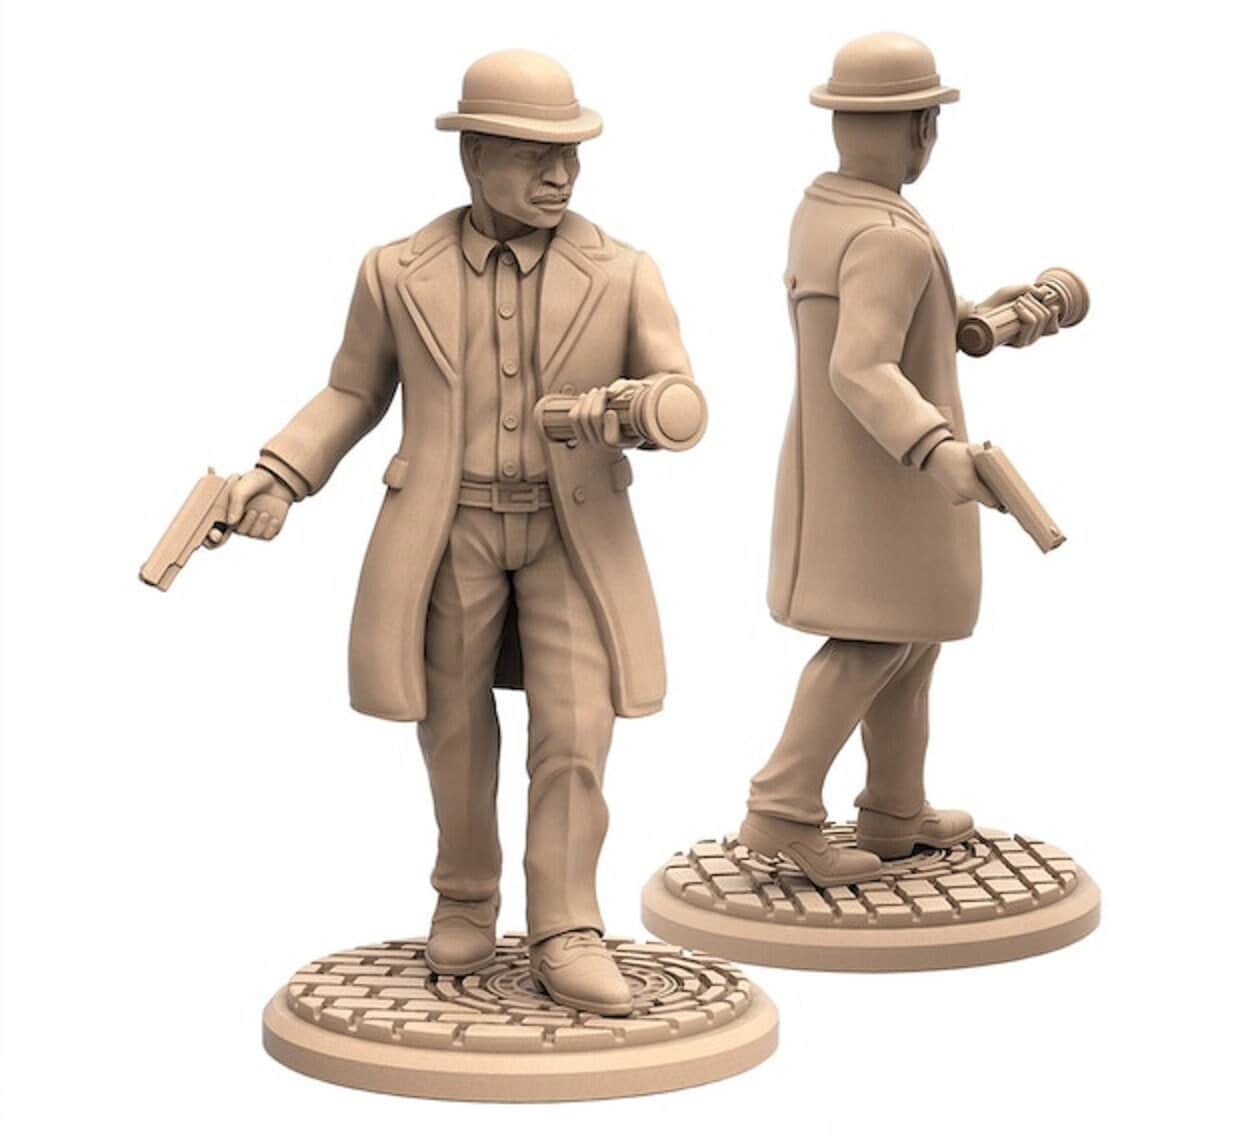 Detective Miniature - Adaevy Creations - 28mm / 32mm / 36mm